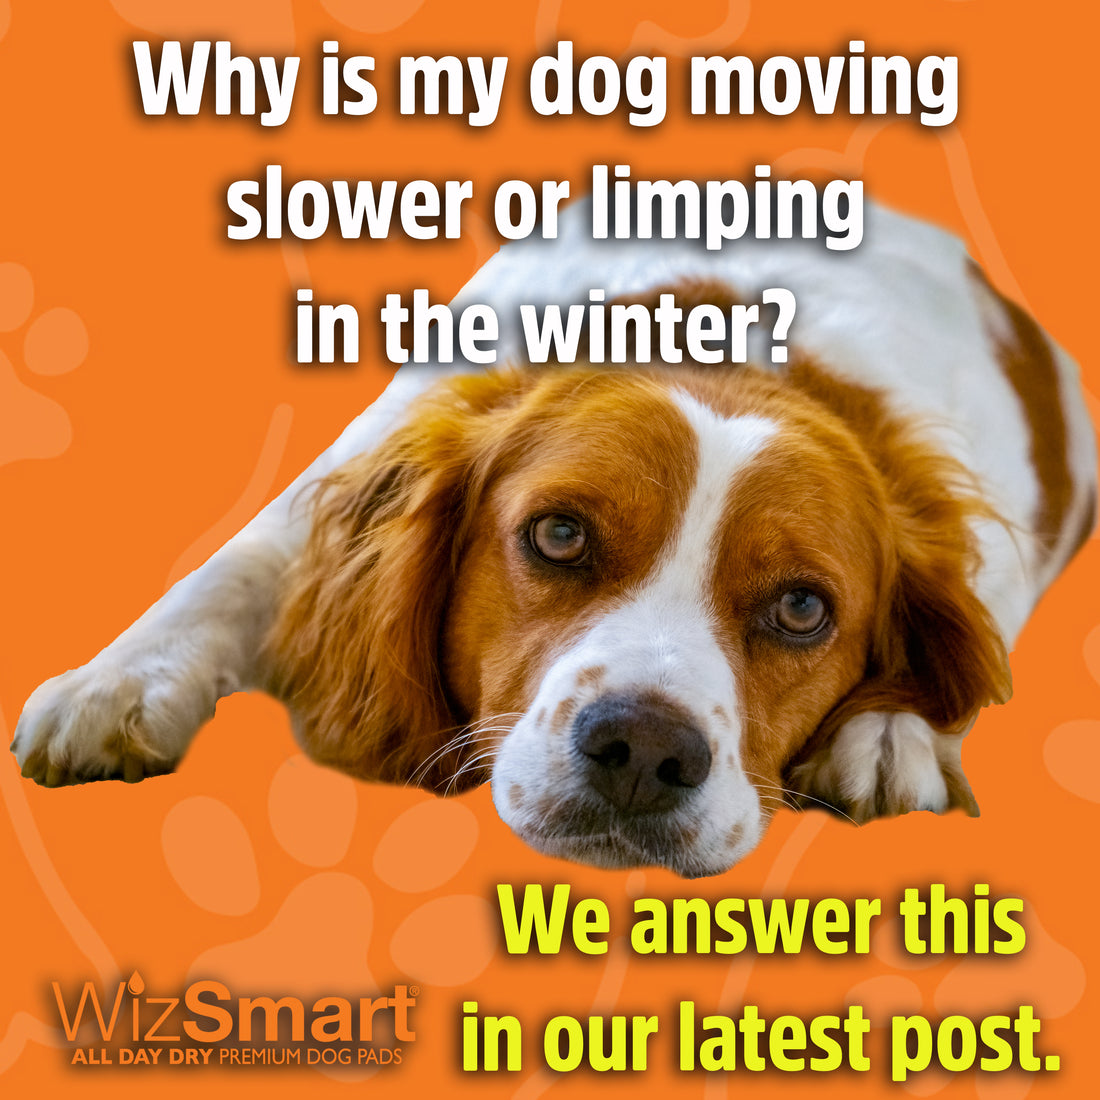 Why is my dog moving slower or limping in the winter?